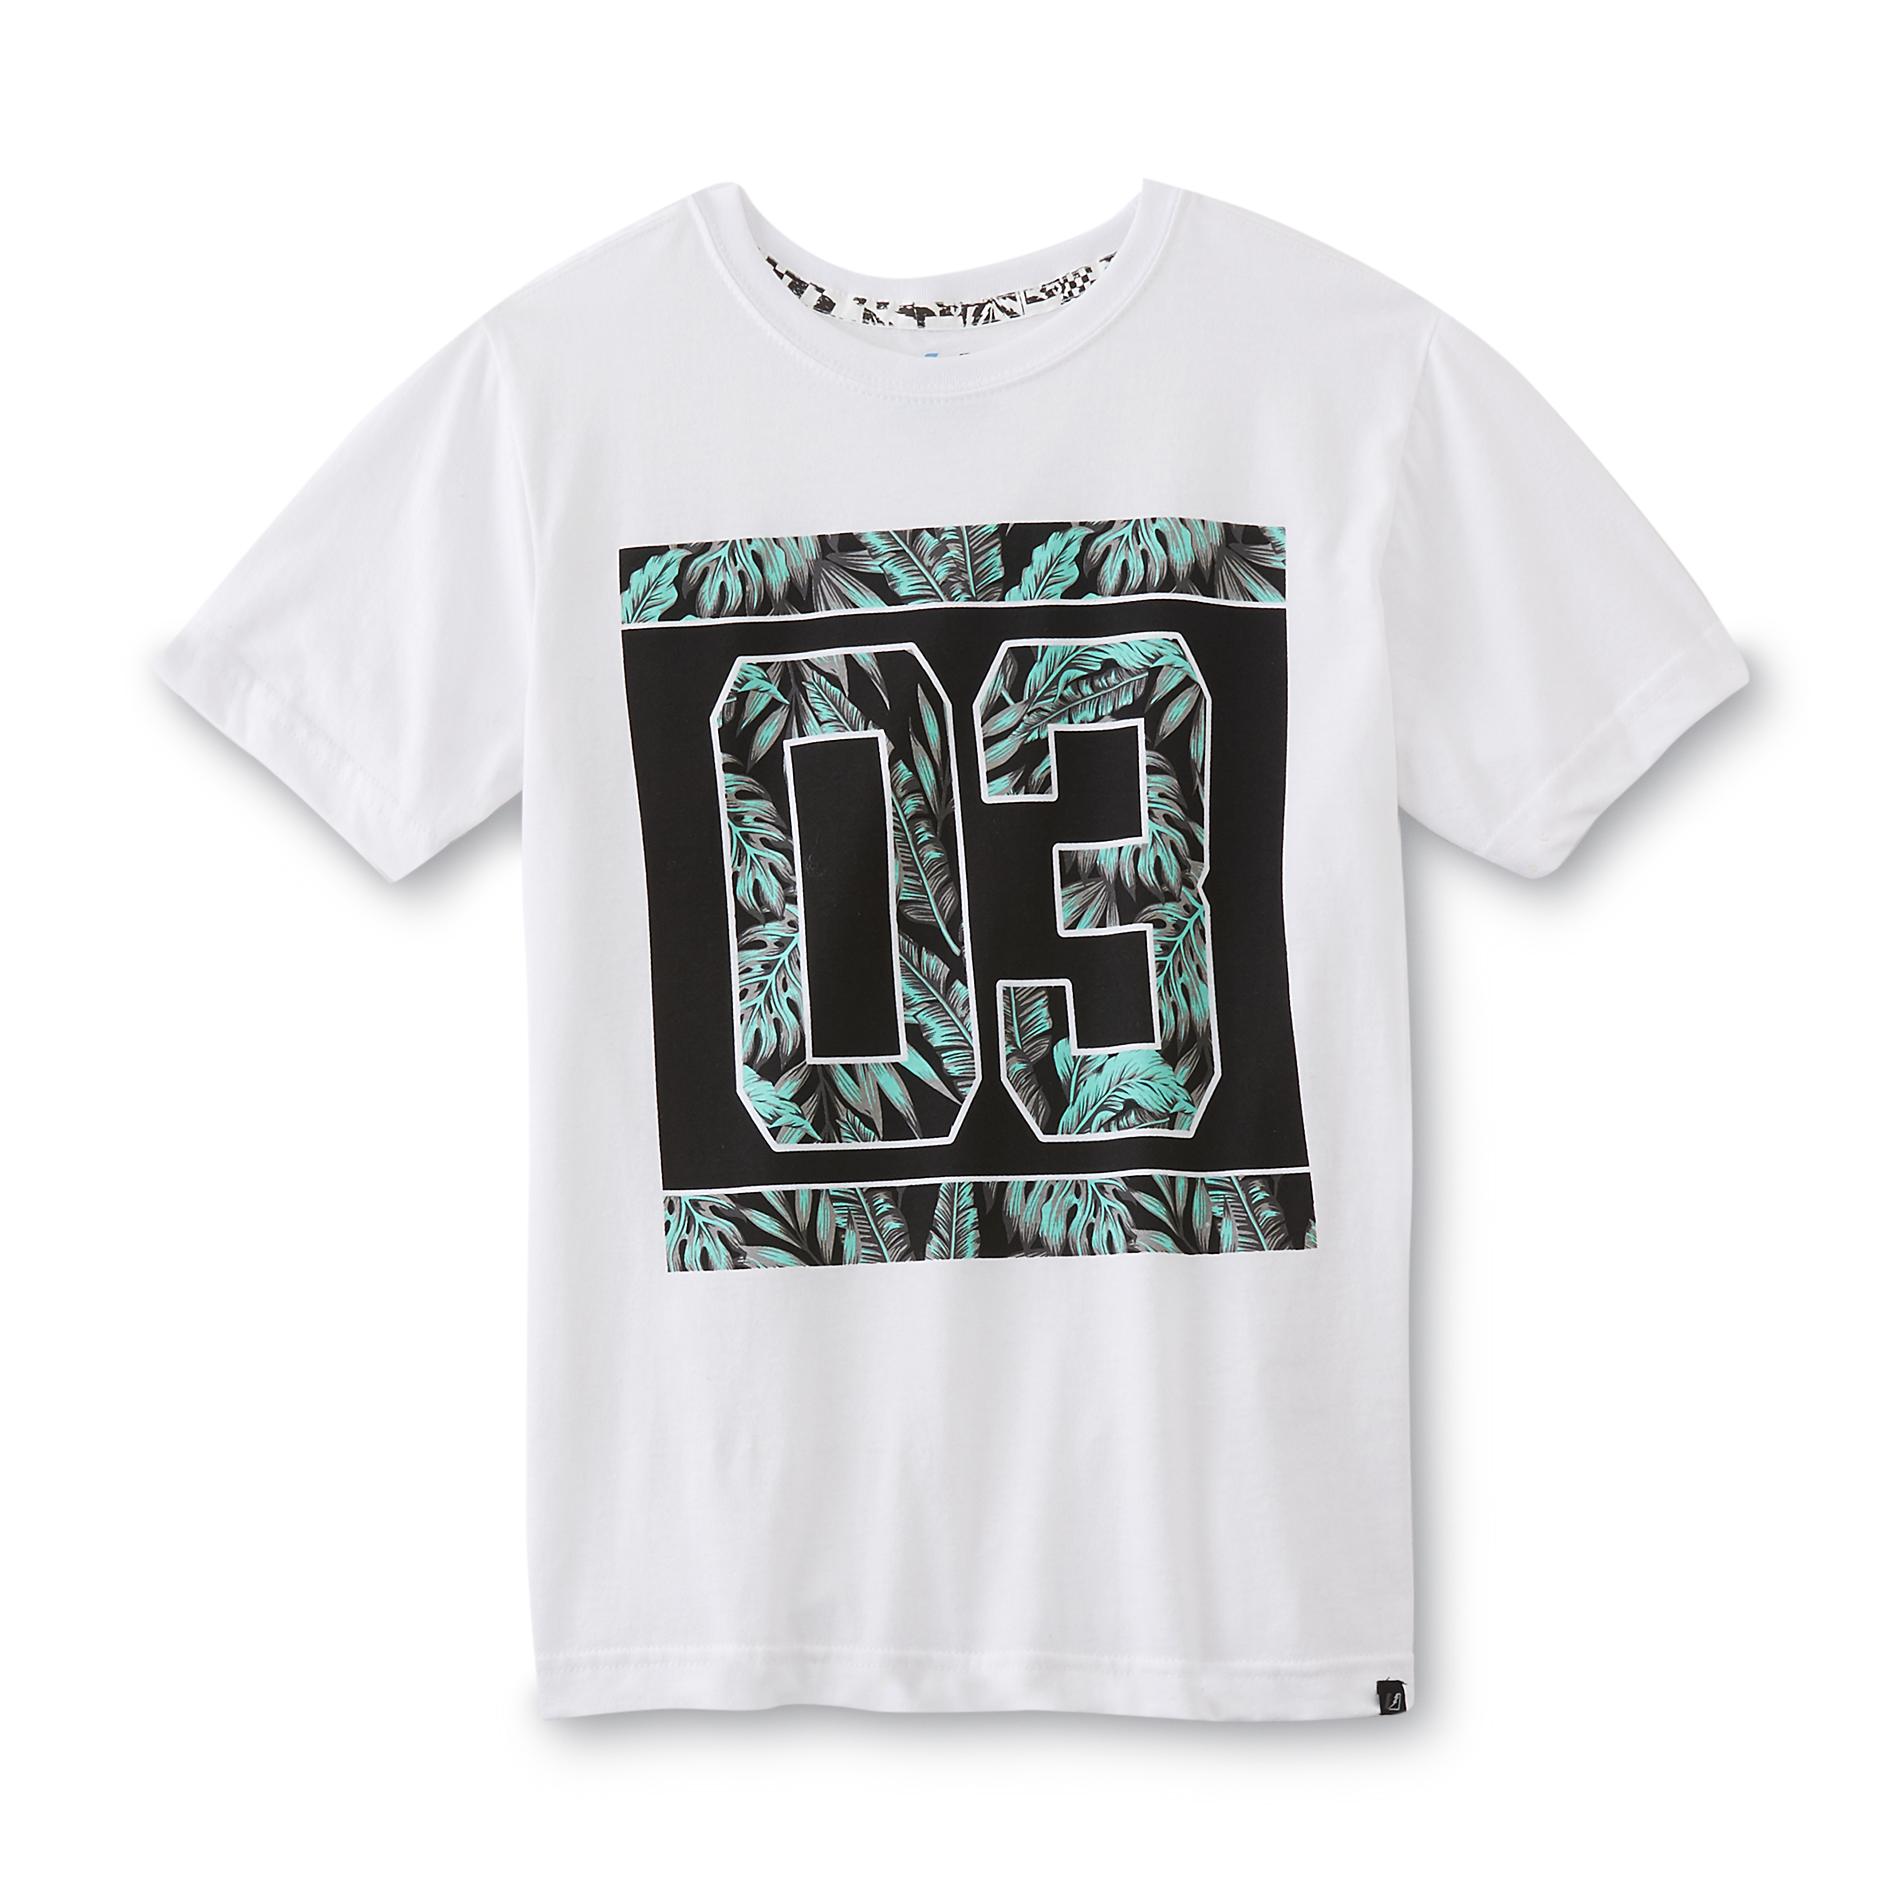 Amplify Boy's Graphic T-Shirt - Palm Leaves